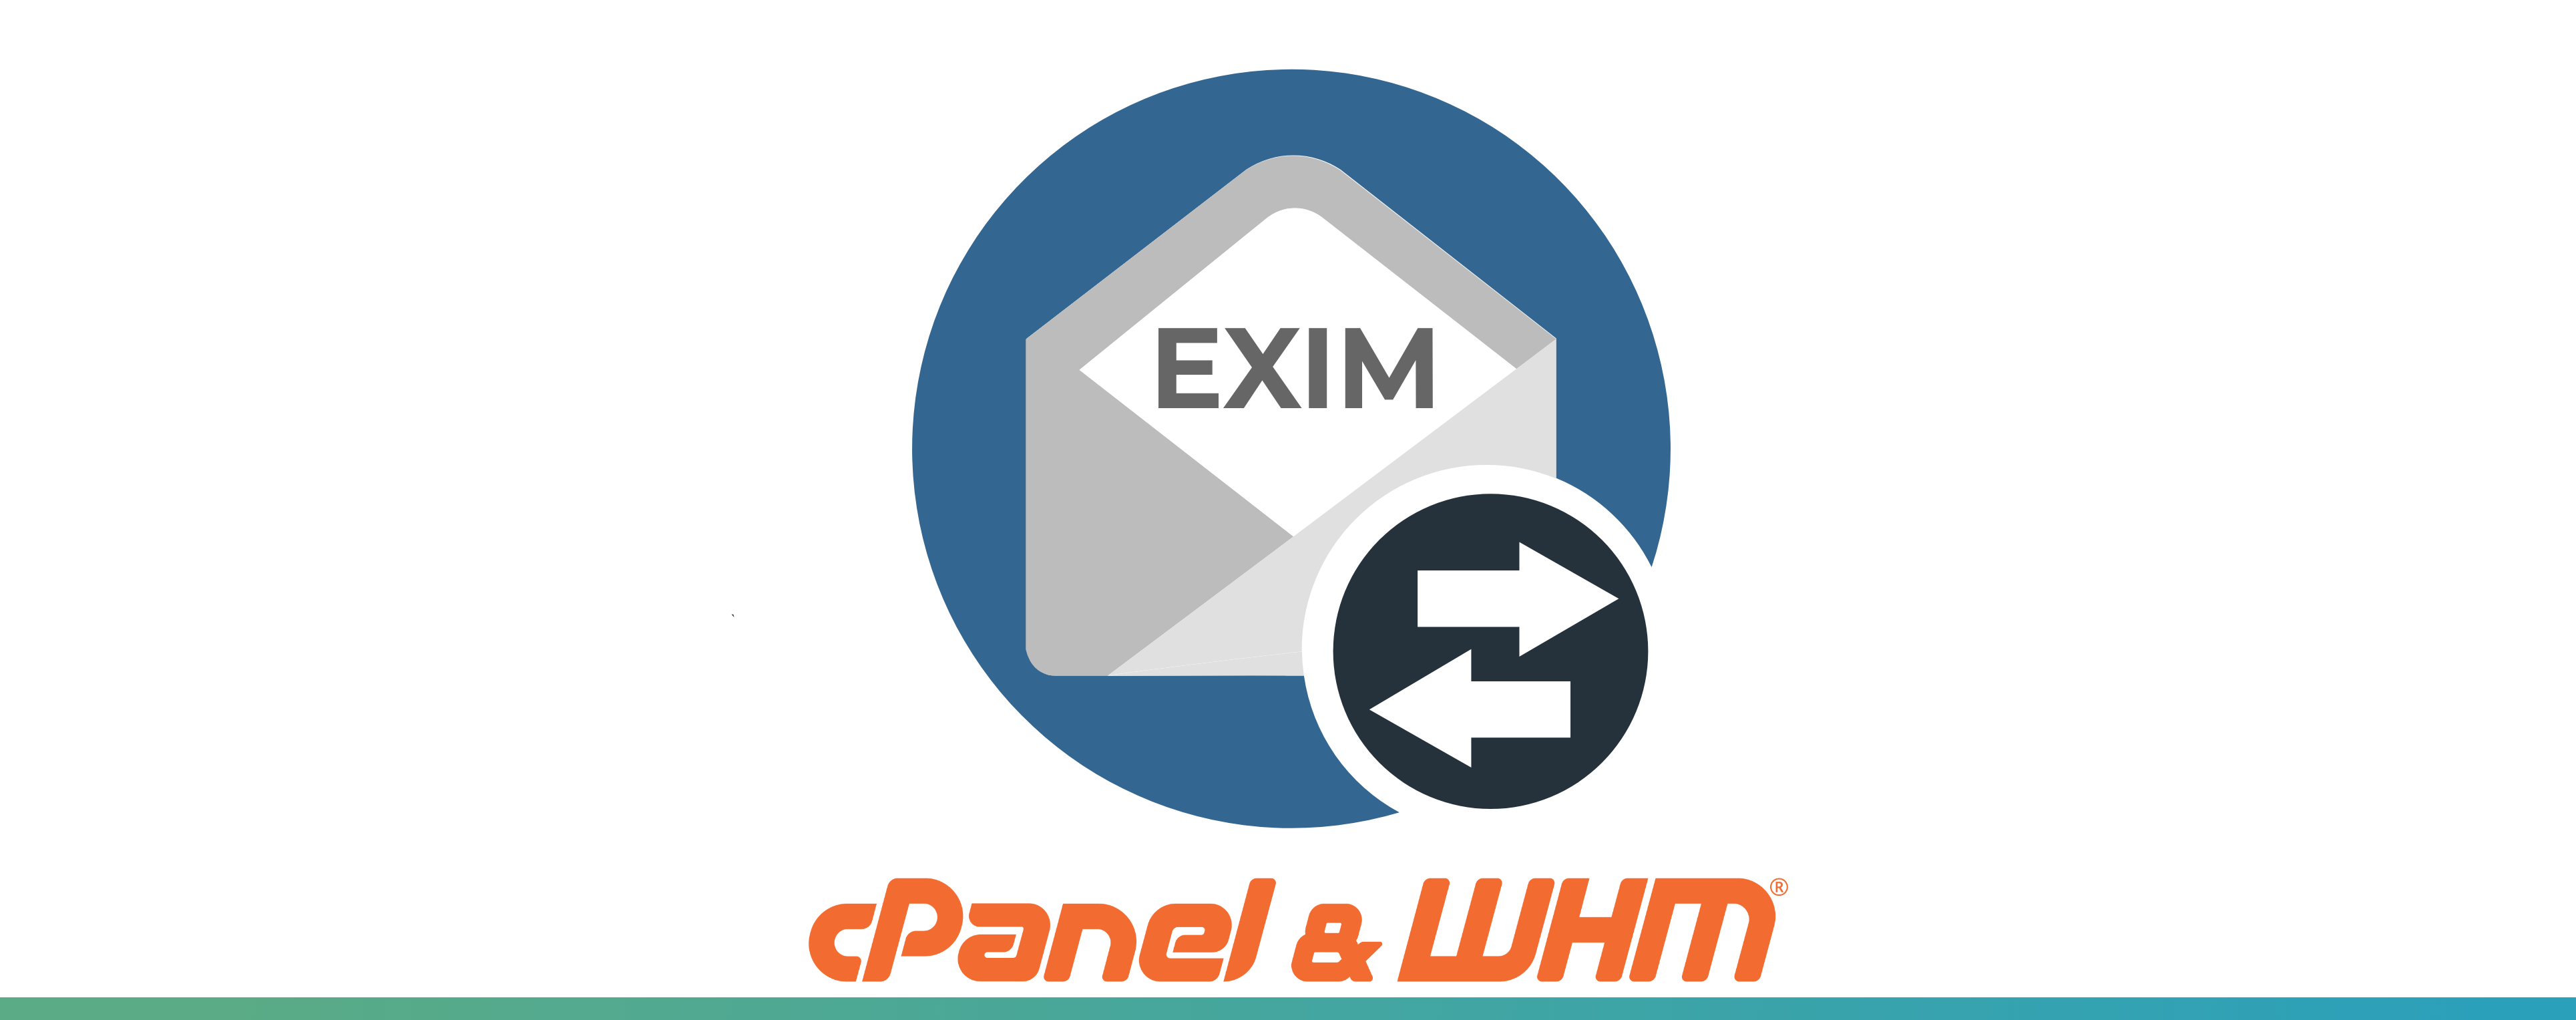 Securing Exim for your Hosting Environment